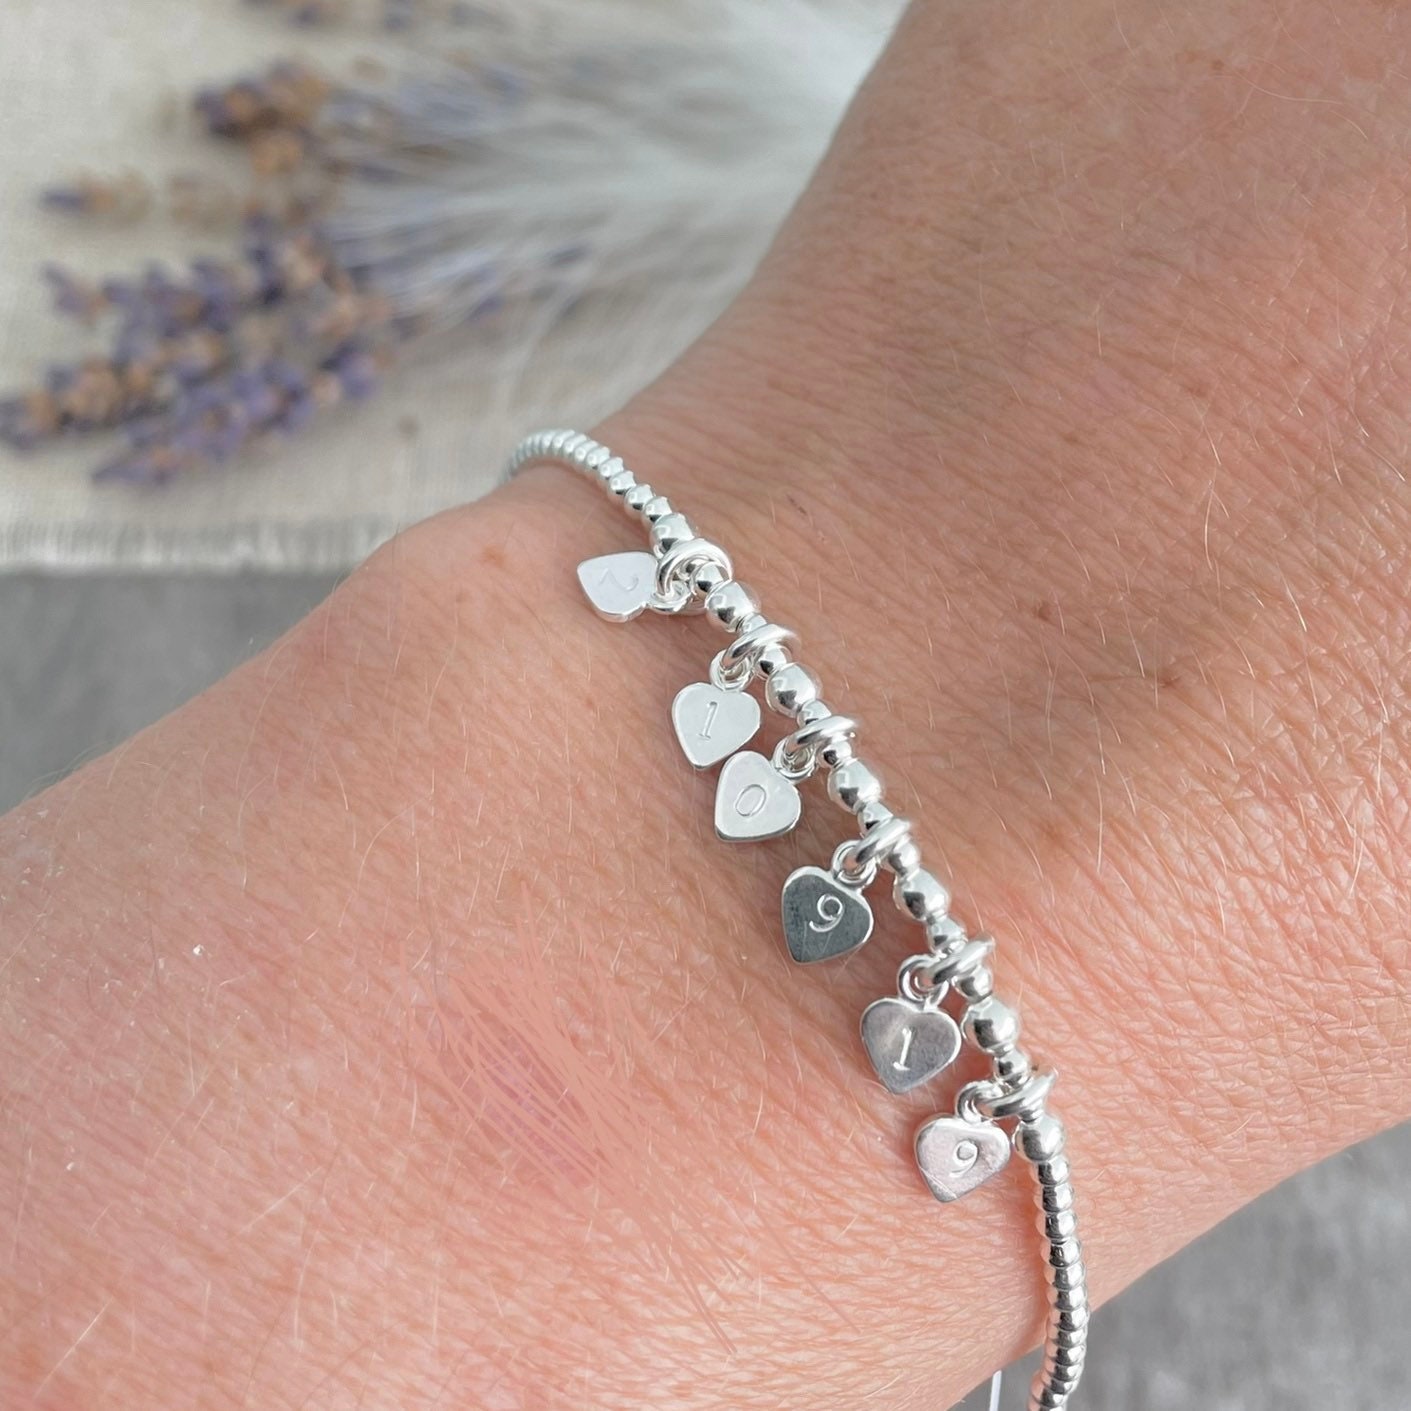 Bracelet for new mum, Dainty Date Bracelet with Baby Birth Date in Sterling Silver